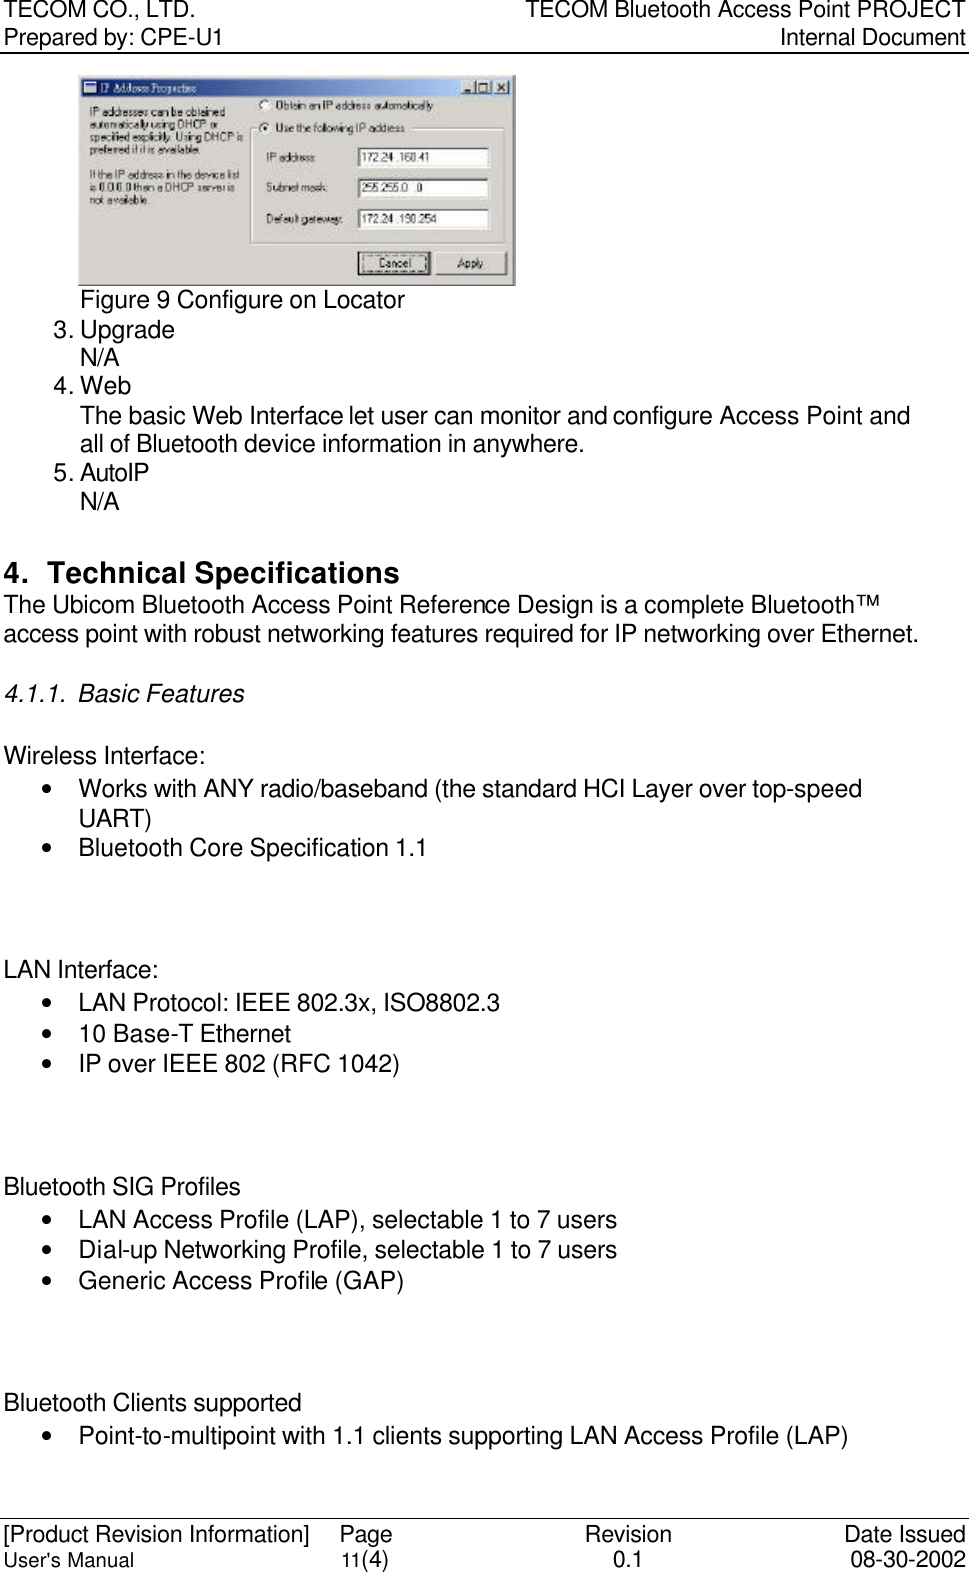 TECOM CO., LTD. TECOM Bluetooth Access Point PROJECT Prepared by: CPE-U1   Internal Document  [Product Revision Information] Page Revision Date Issued User&apos;s Manual 11(4) 0.1 08-30-2002 Figure 9 Configure on Locator 3. Upgrade N/A 4. Web   The basic Web Interface let user can monitor and configure Access Point and all of Bluetooth device information in anywhere. 5. AutoIP N/A  4. Technical Specifications The Ubicom Bluetooth Access Point Reference Design is a complete Bluetooth™ access point with robust networking features required for IP networking over Ethernet. 4.1.1. Basic Features Wireless Interface: • Works with ANY radio/baseband (the standard HCI Layer over top-speed UART) • Bluetooth Core Specification 1.1  LAN Interface: • LAN Protocol: IEEE 802.3x, ISO8802.3 • 10 Base-T Ethernet • IP over IEEE 802 (RFC 1042)  Bluetooth SIG Profiles • LAN Access Profile (LAP), selectable 1 to 7 users • Dial-up Networking Profile, selectable 1 to 7 users • Generic Access Profile (GAP)  Bluetooth Clients supported • Point-to-multipoint with 1.1 clients supporting LAN Access Profile (LAP) 